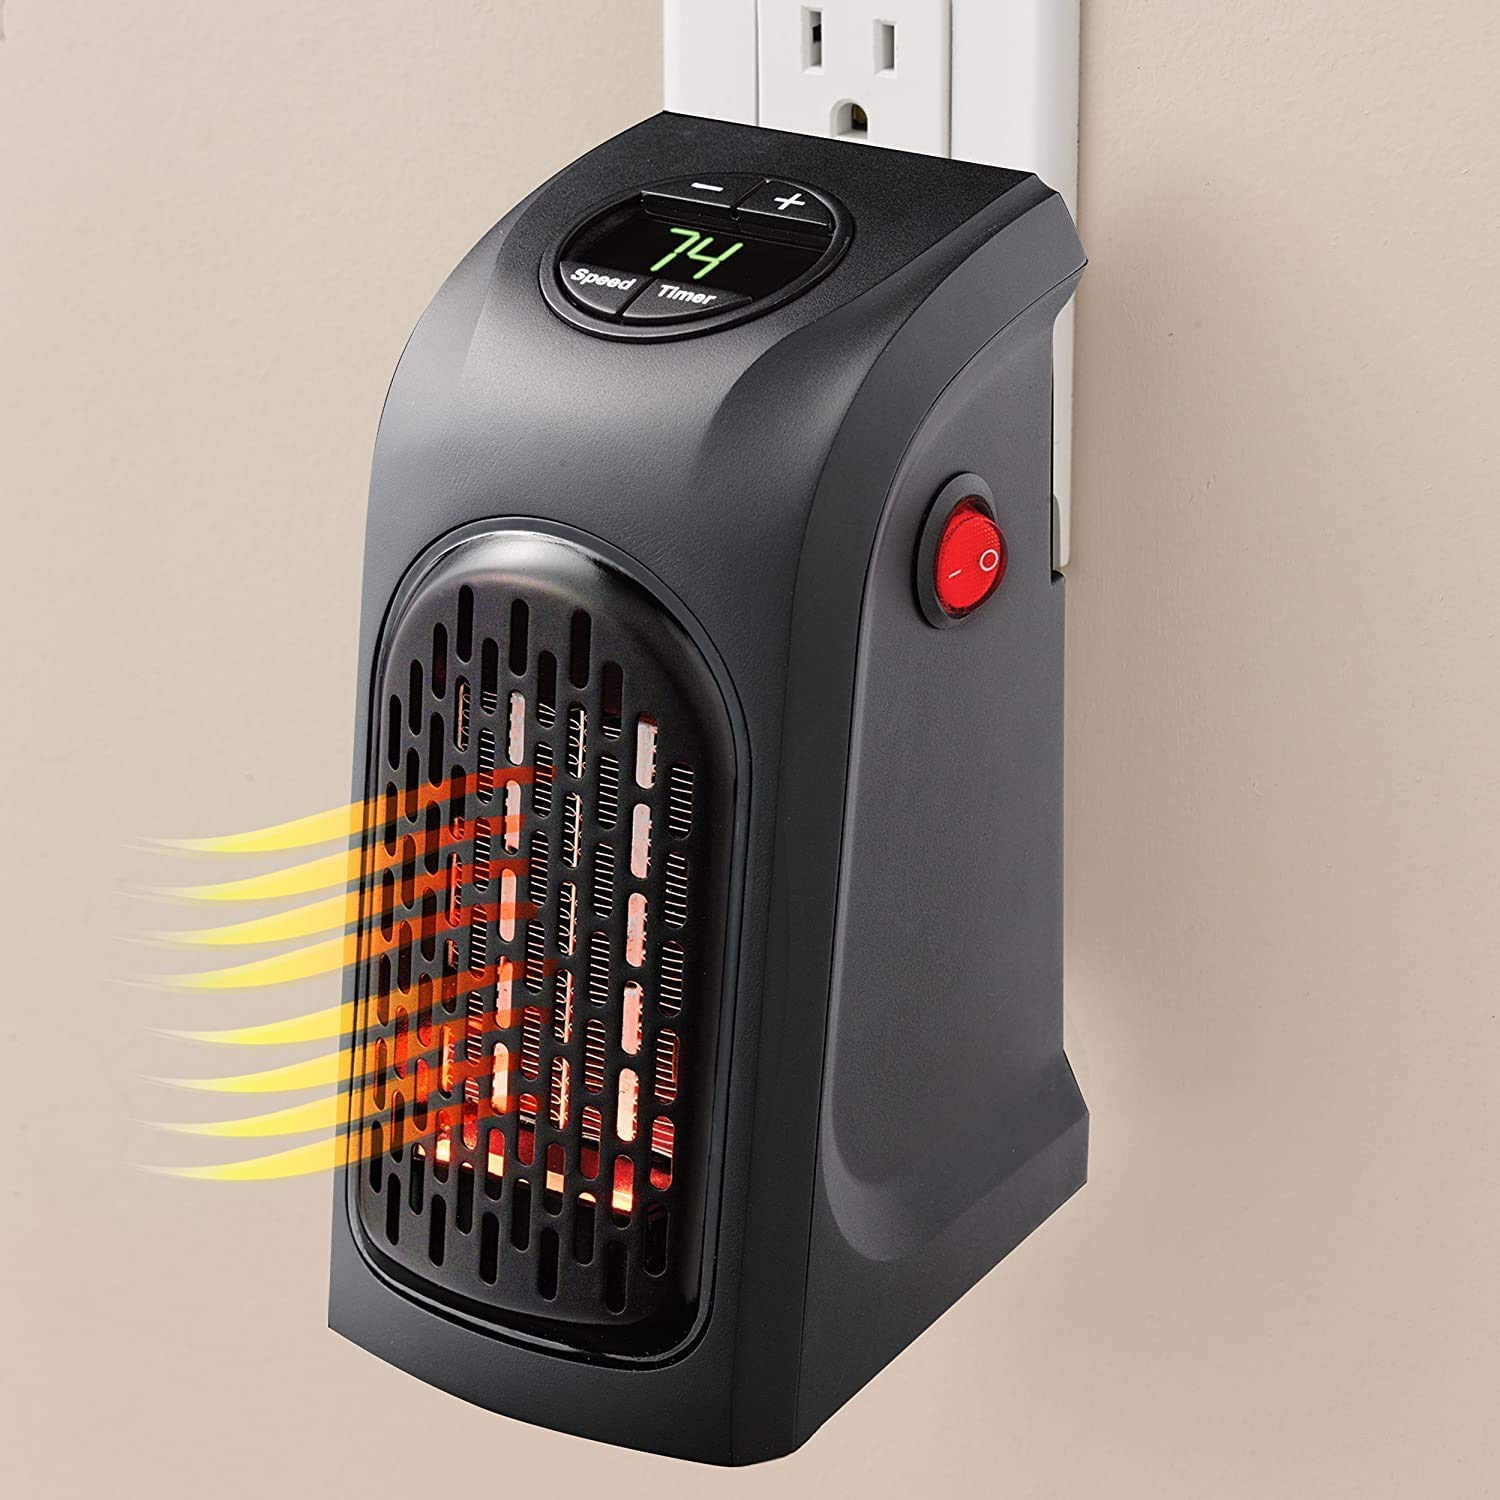 Amazon Deal: Best deals on room heaters for winter, best brands of room heaters available on Amazon for Rs.600